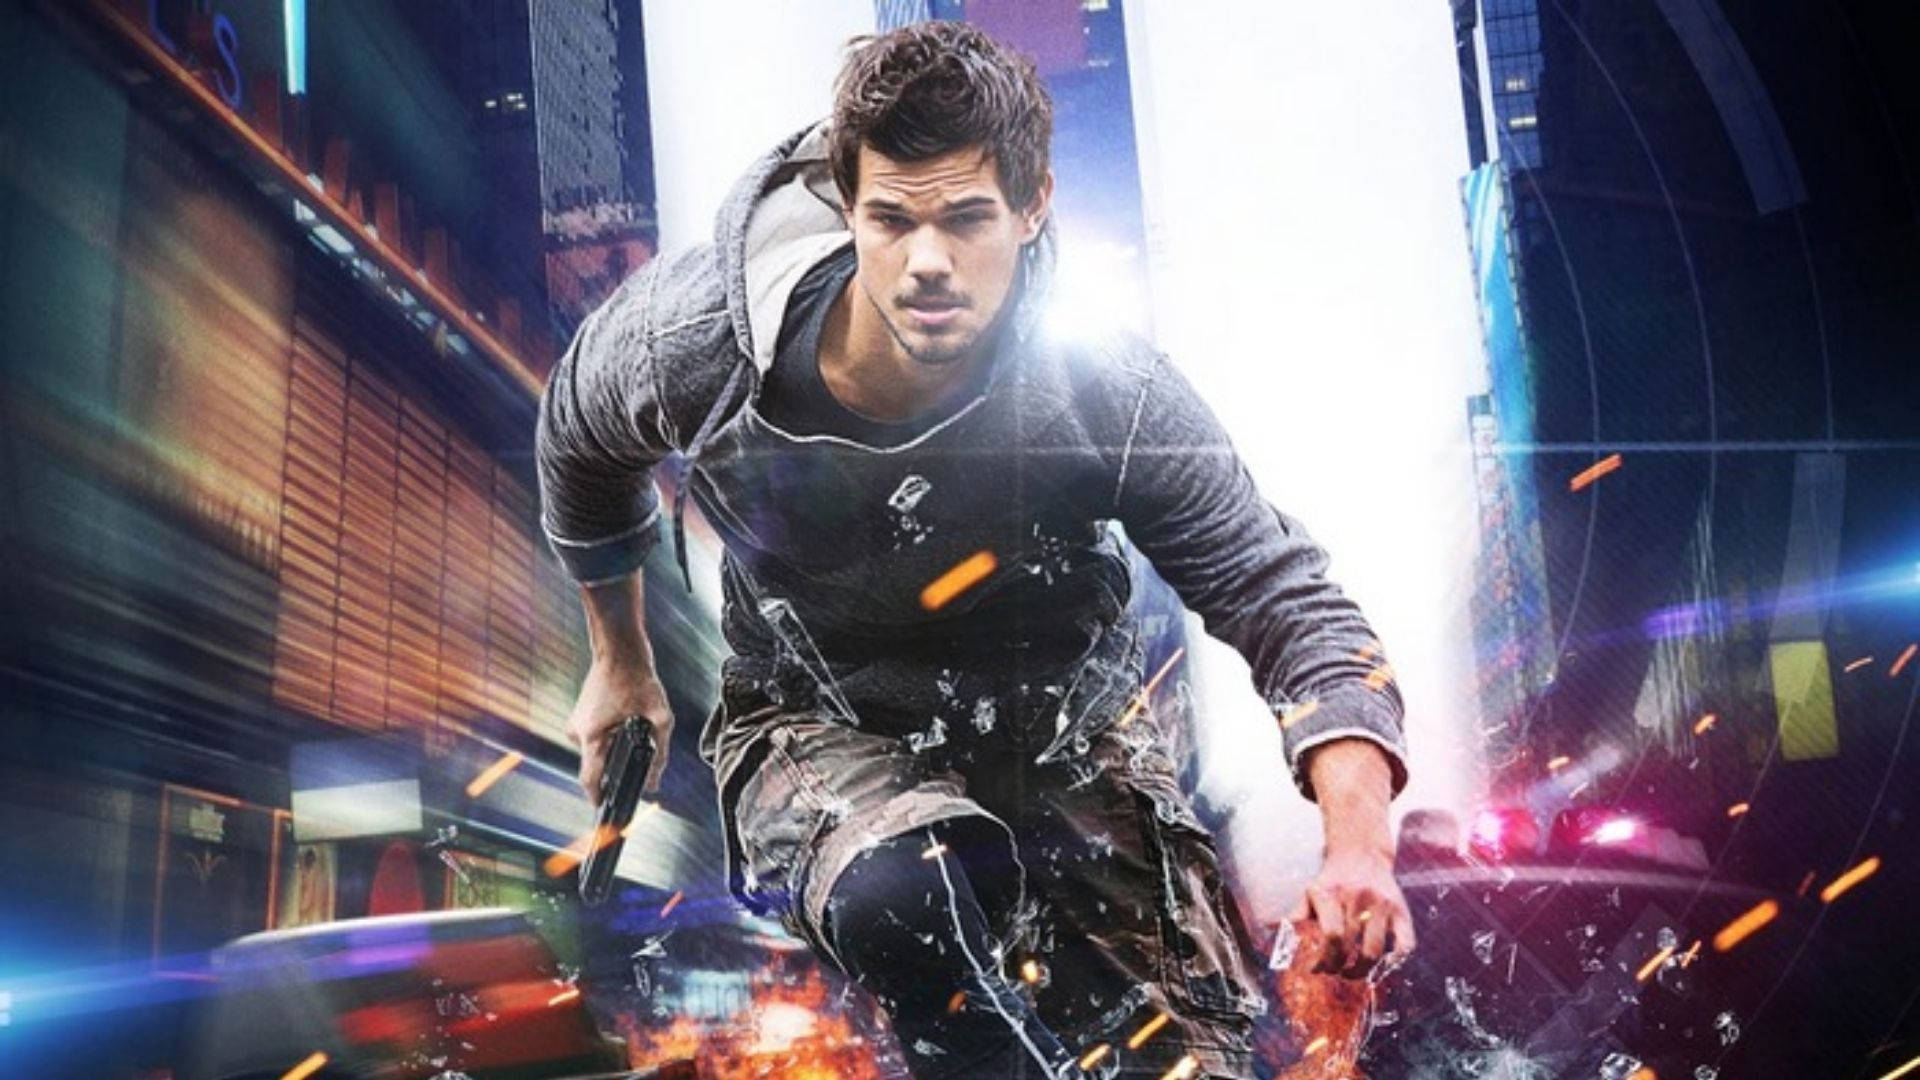 Taylor Lautner Caught in an Agile Moment Wallpaper